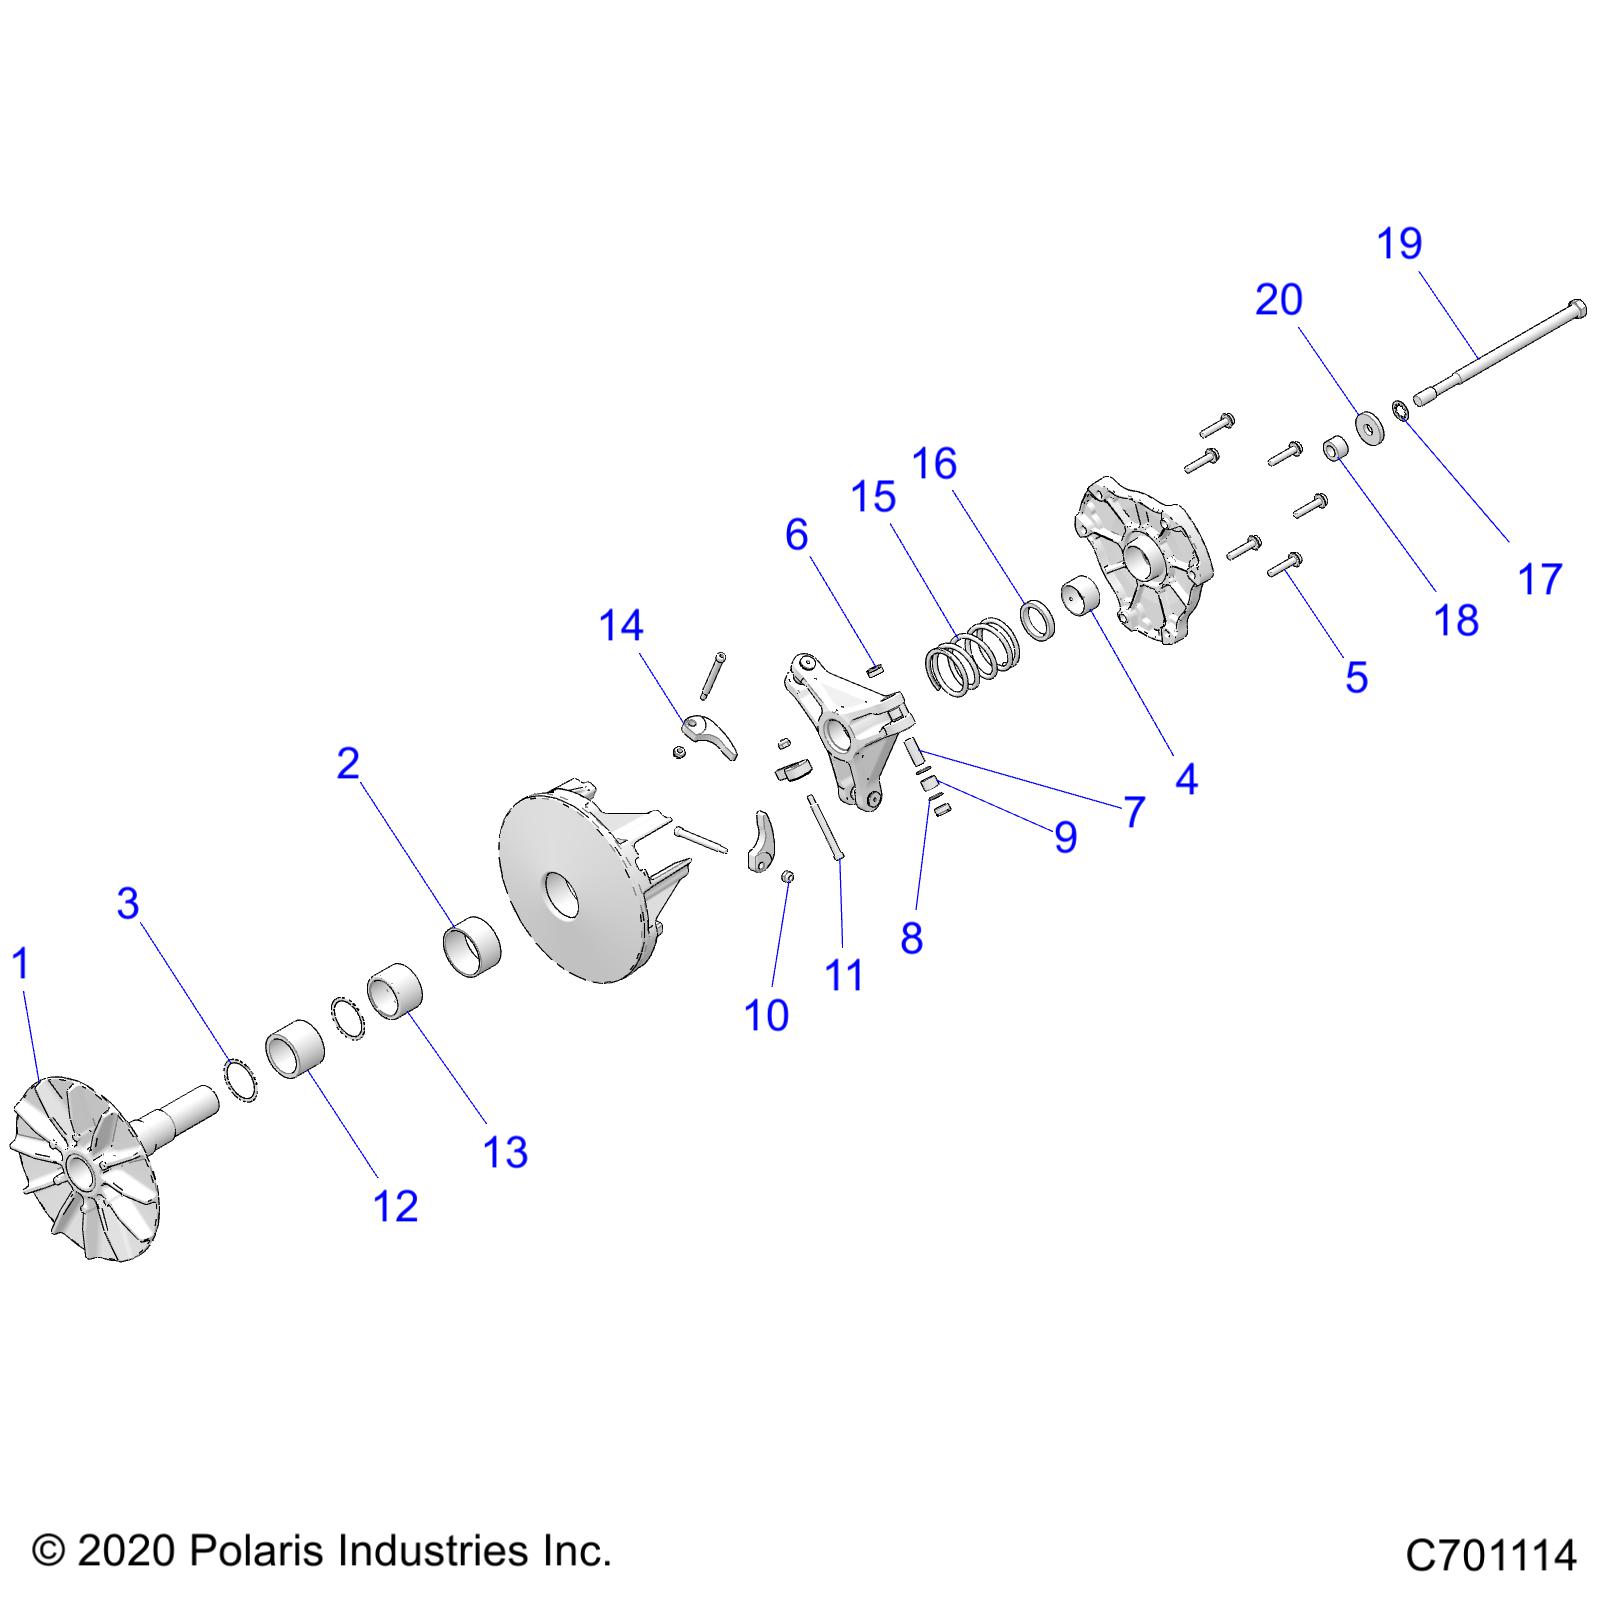 Part Number : 5020433 ROLLER SHIFT WEIGHT